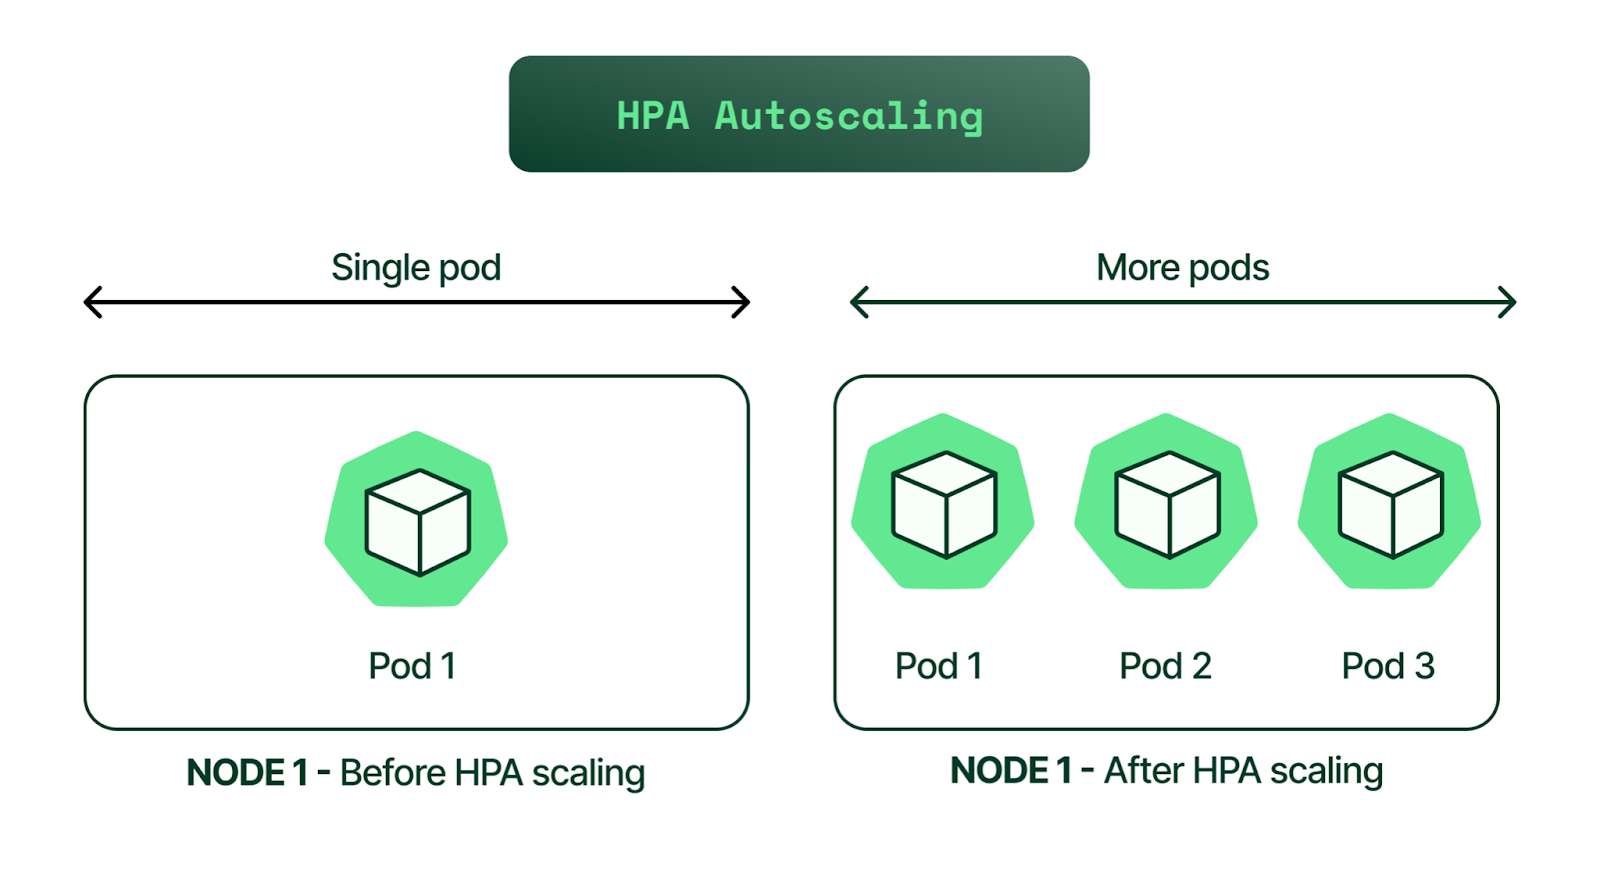 HPA Autoscaling